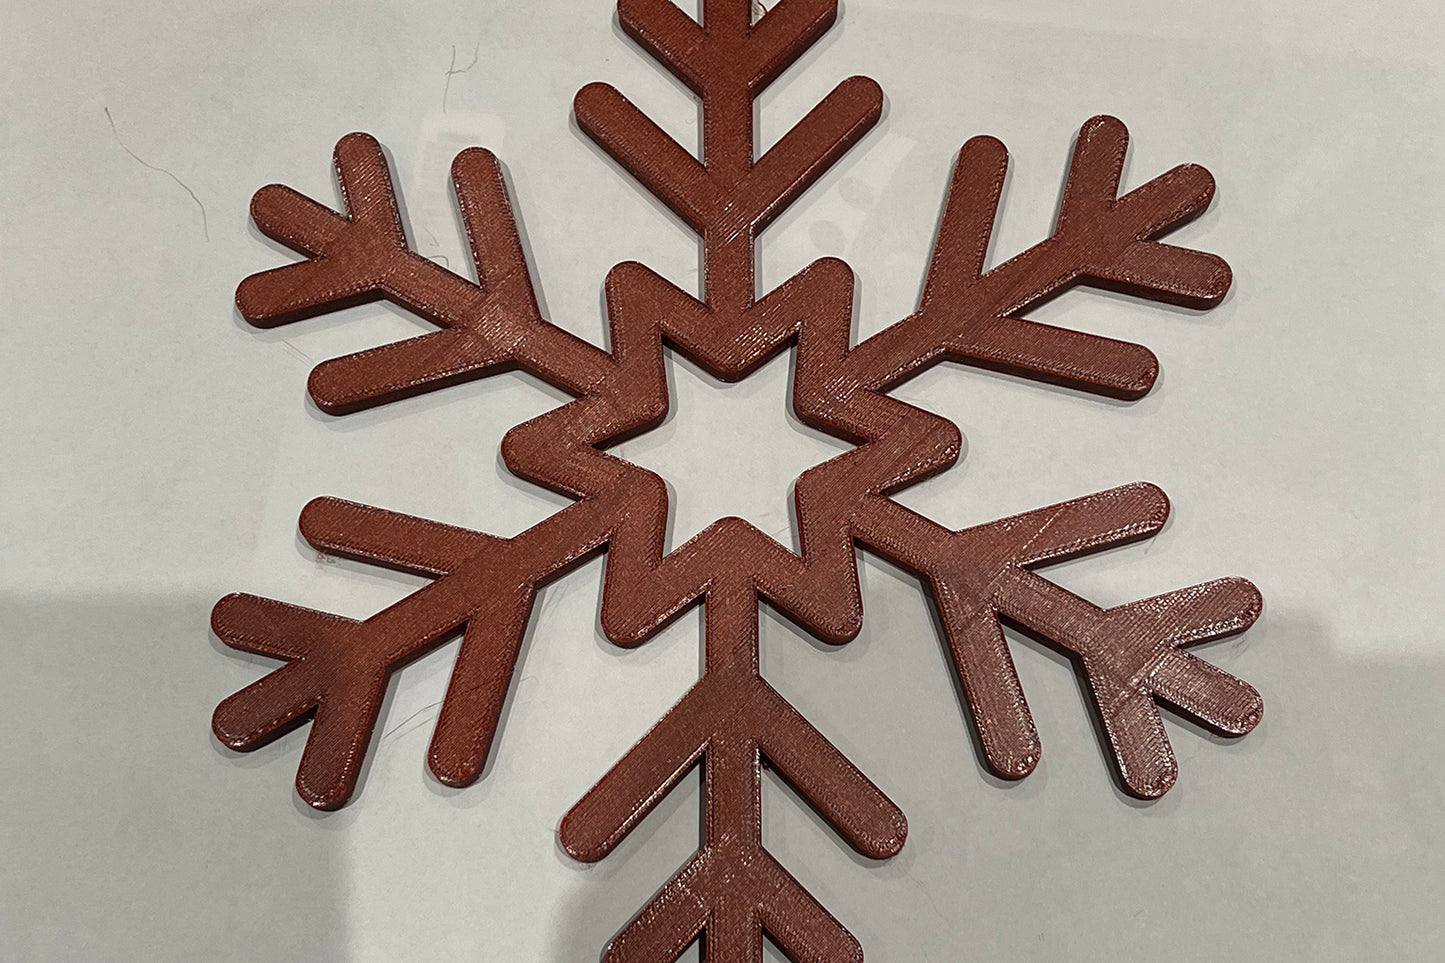 Outdoor snowflake Ornament  - 3D Printed